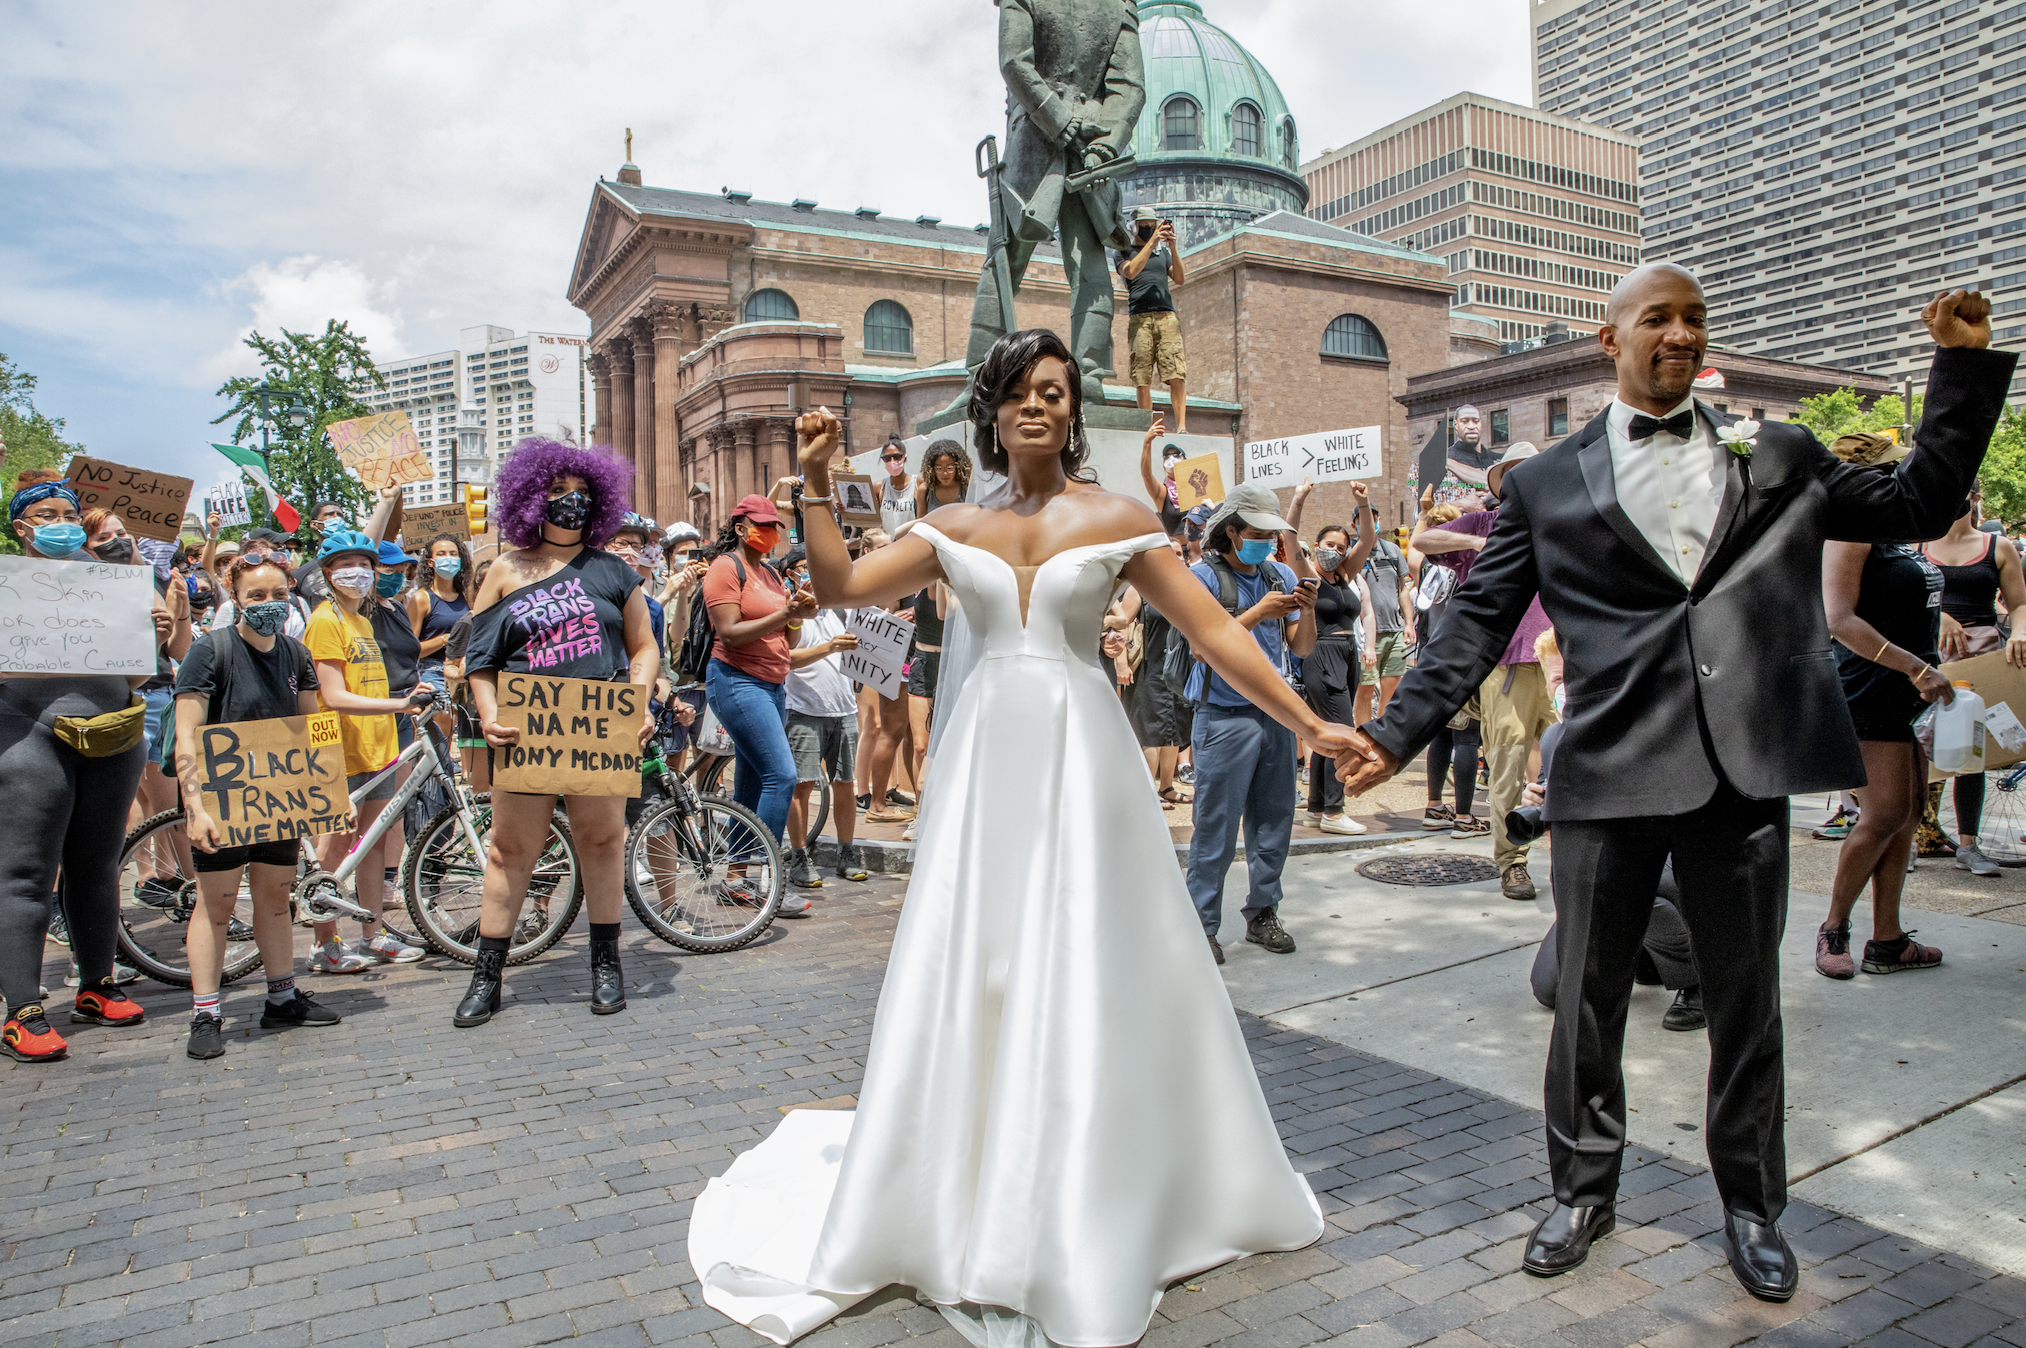 kerry anne and michael gordon at a black lives matter protest right before their wedding in philadelphia, pa